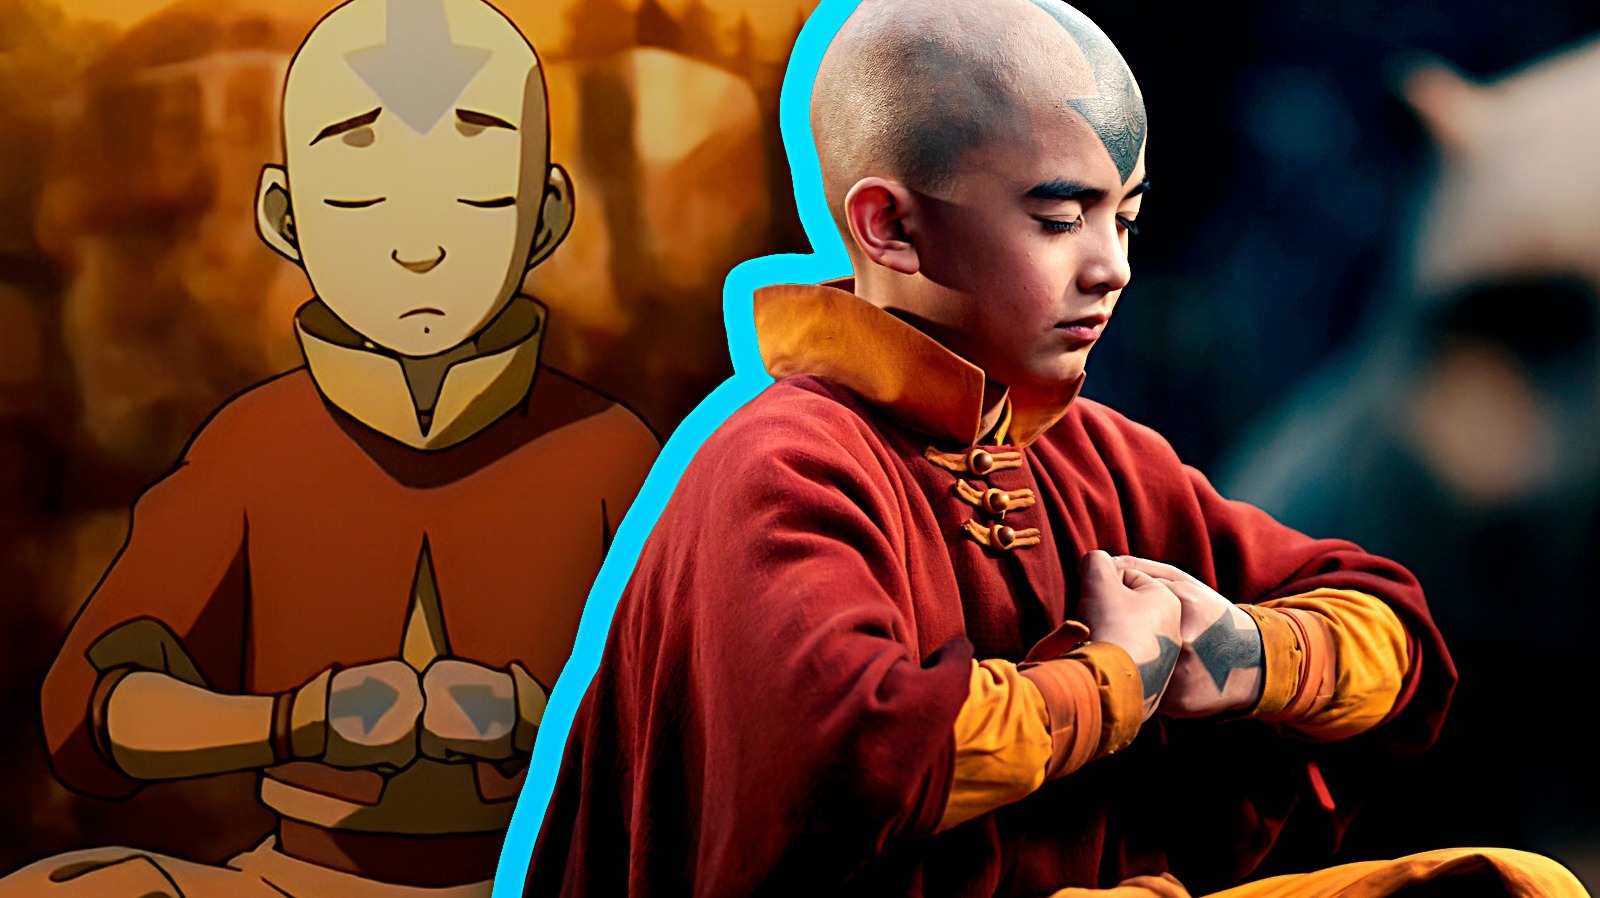 The Last Airbender Shouldn’t Have Cut These Anime Scenes